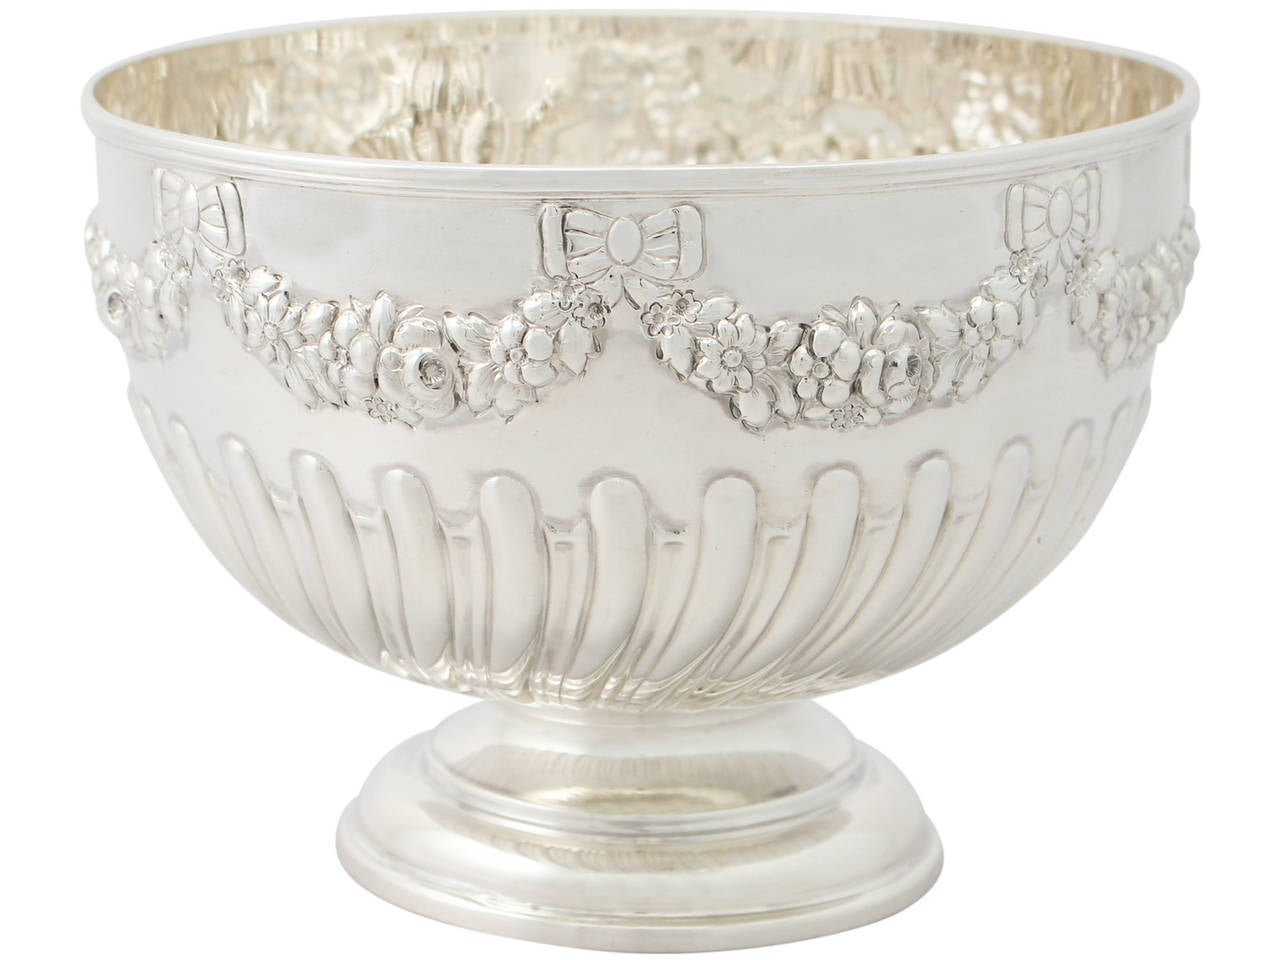 A fine and impressive antique Victorian sterling silver presentation bowl; an addition to our ornamental collection

This fine antique Victorian English sterling silver presentation bowl has a circular form onto a circular spreading foot.

The